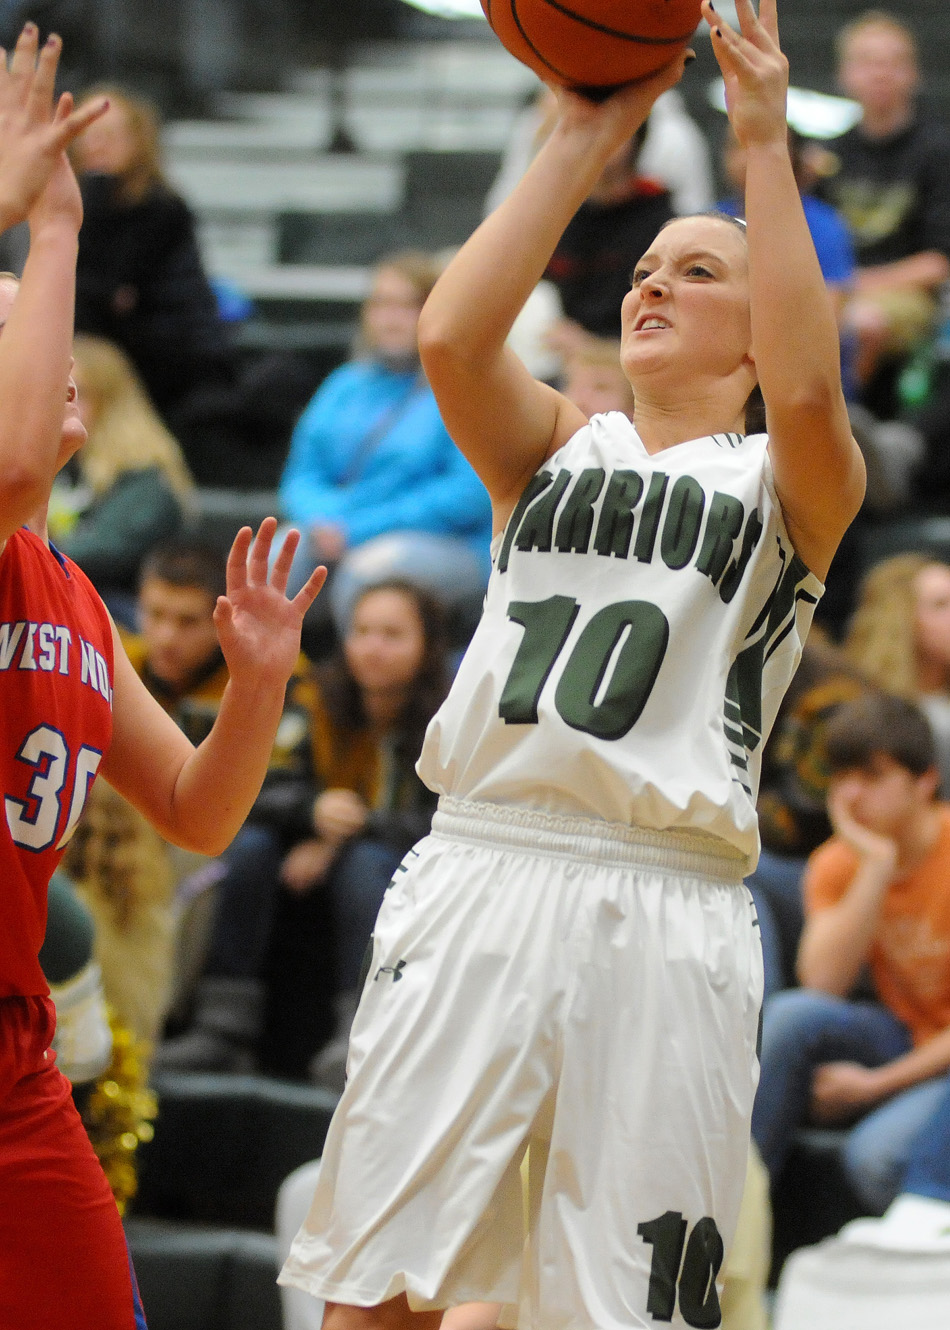 Wawasee's Elizabeth Jackson takes a shot over the defense of West Noble's Becca Schermerhorn.